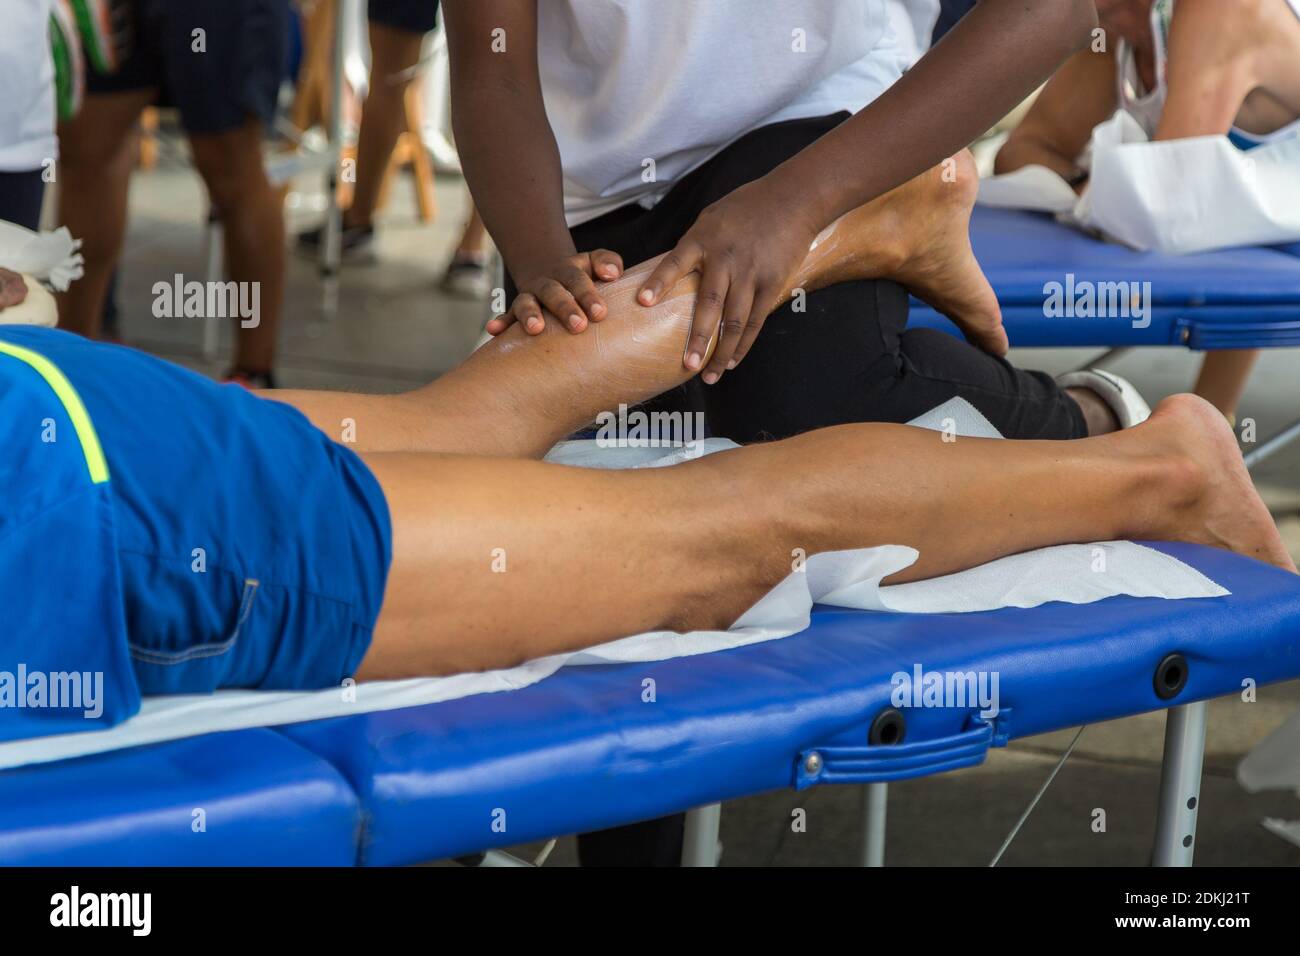 Athlete S Calf Muscle Professional Massage Treatment After Sport Workout Fitness And Wellness